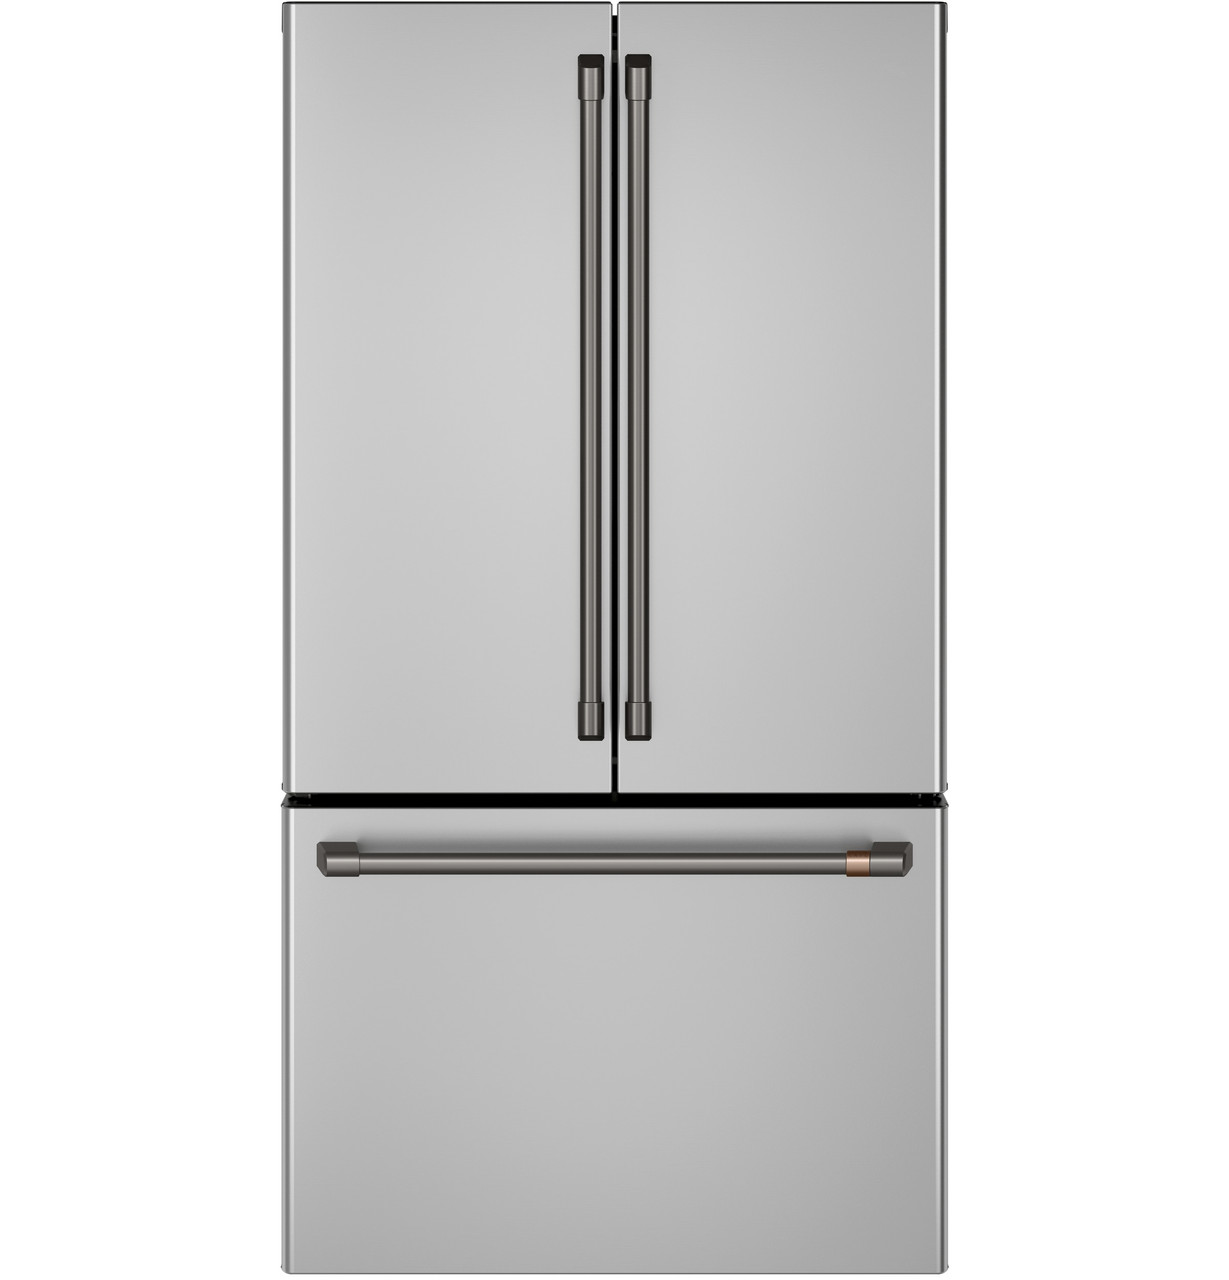 Brushed Stainless Steel Digital Refrigerator and Freezer Thermometer